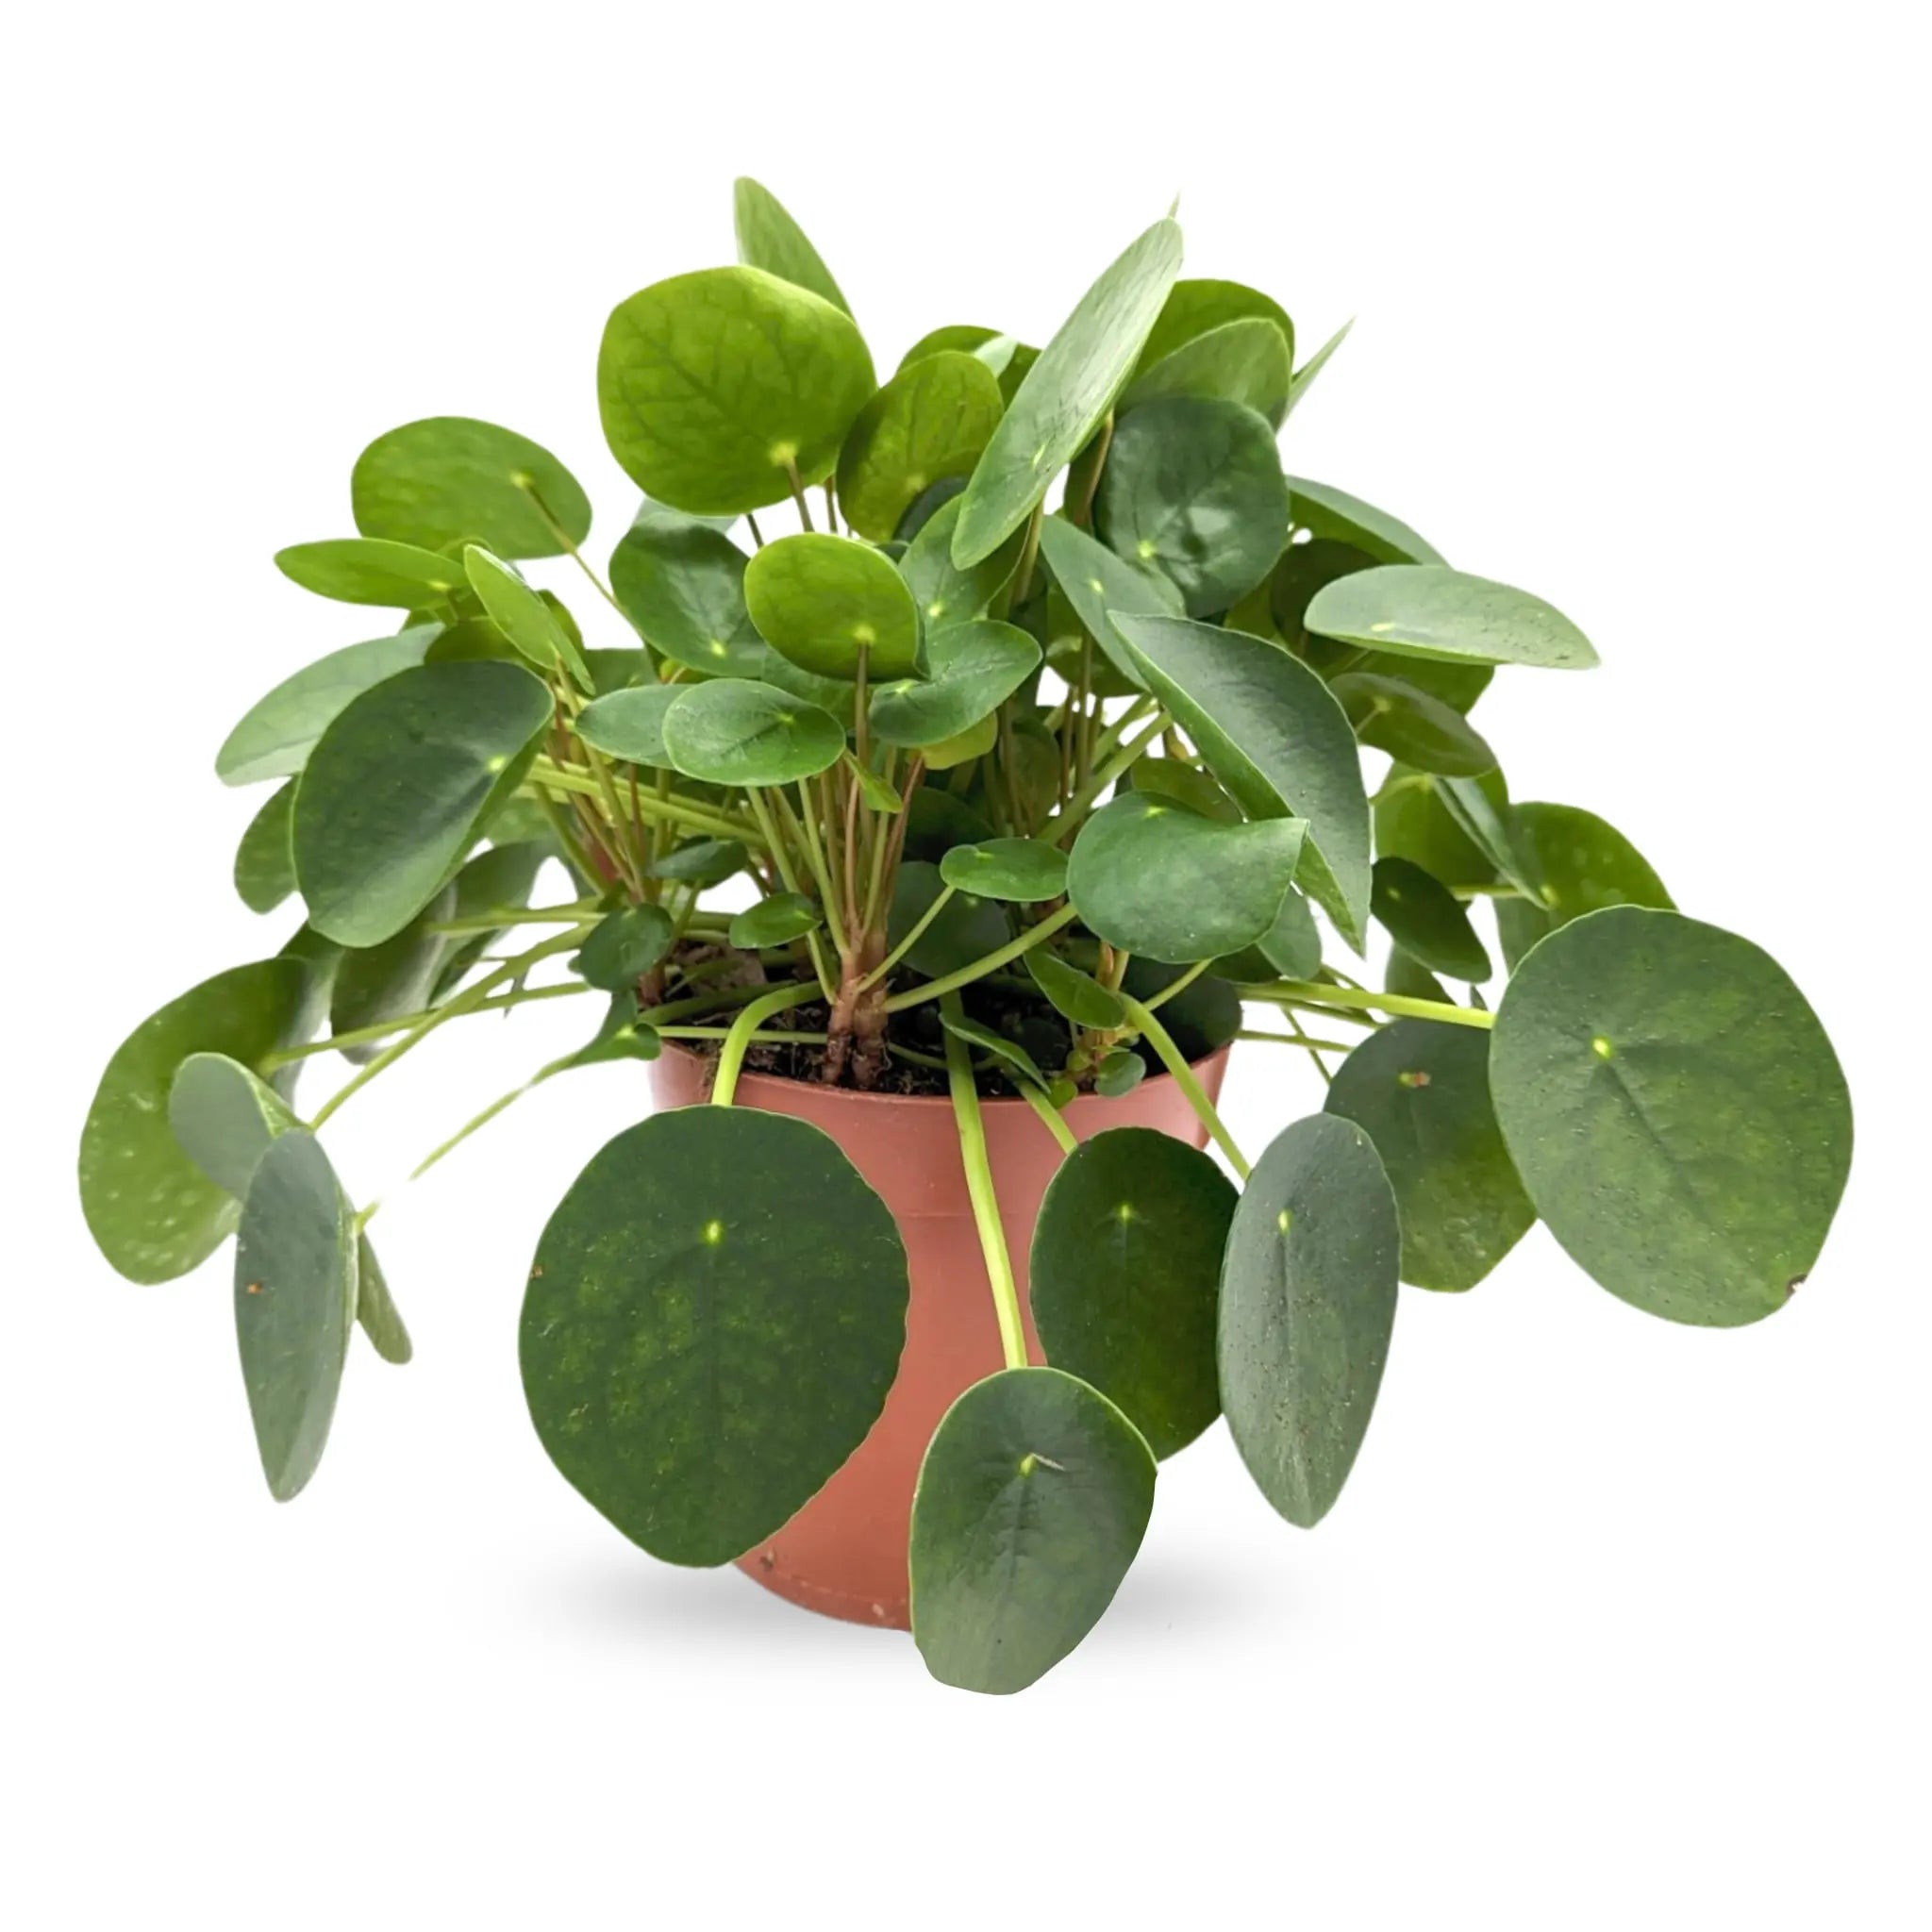 Pilea peperomiodes - Chinese Money Plant Leaf Culture